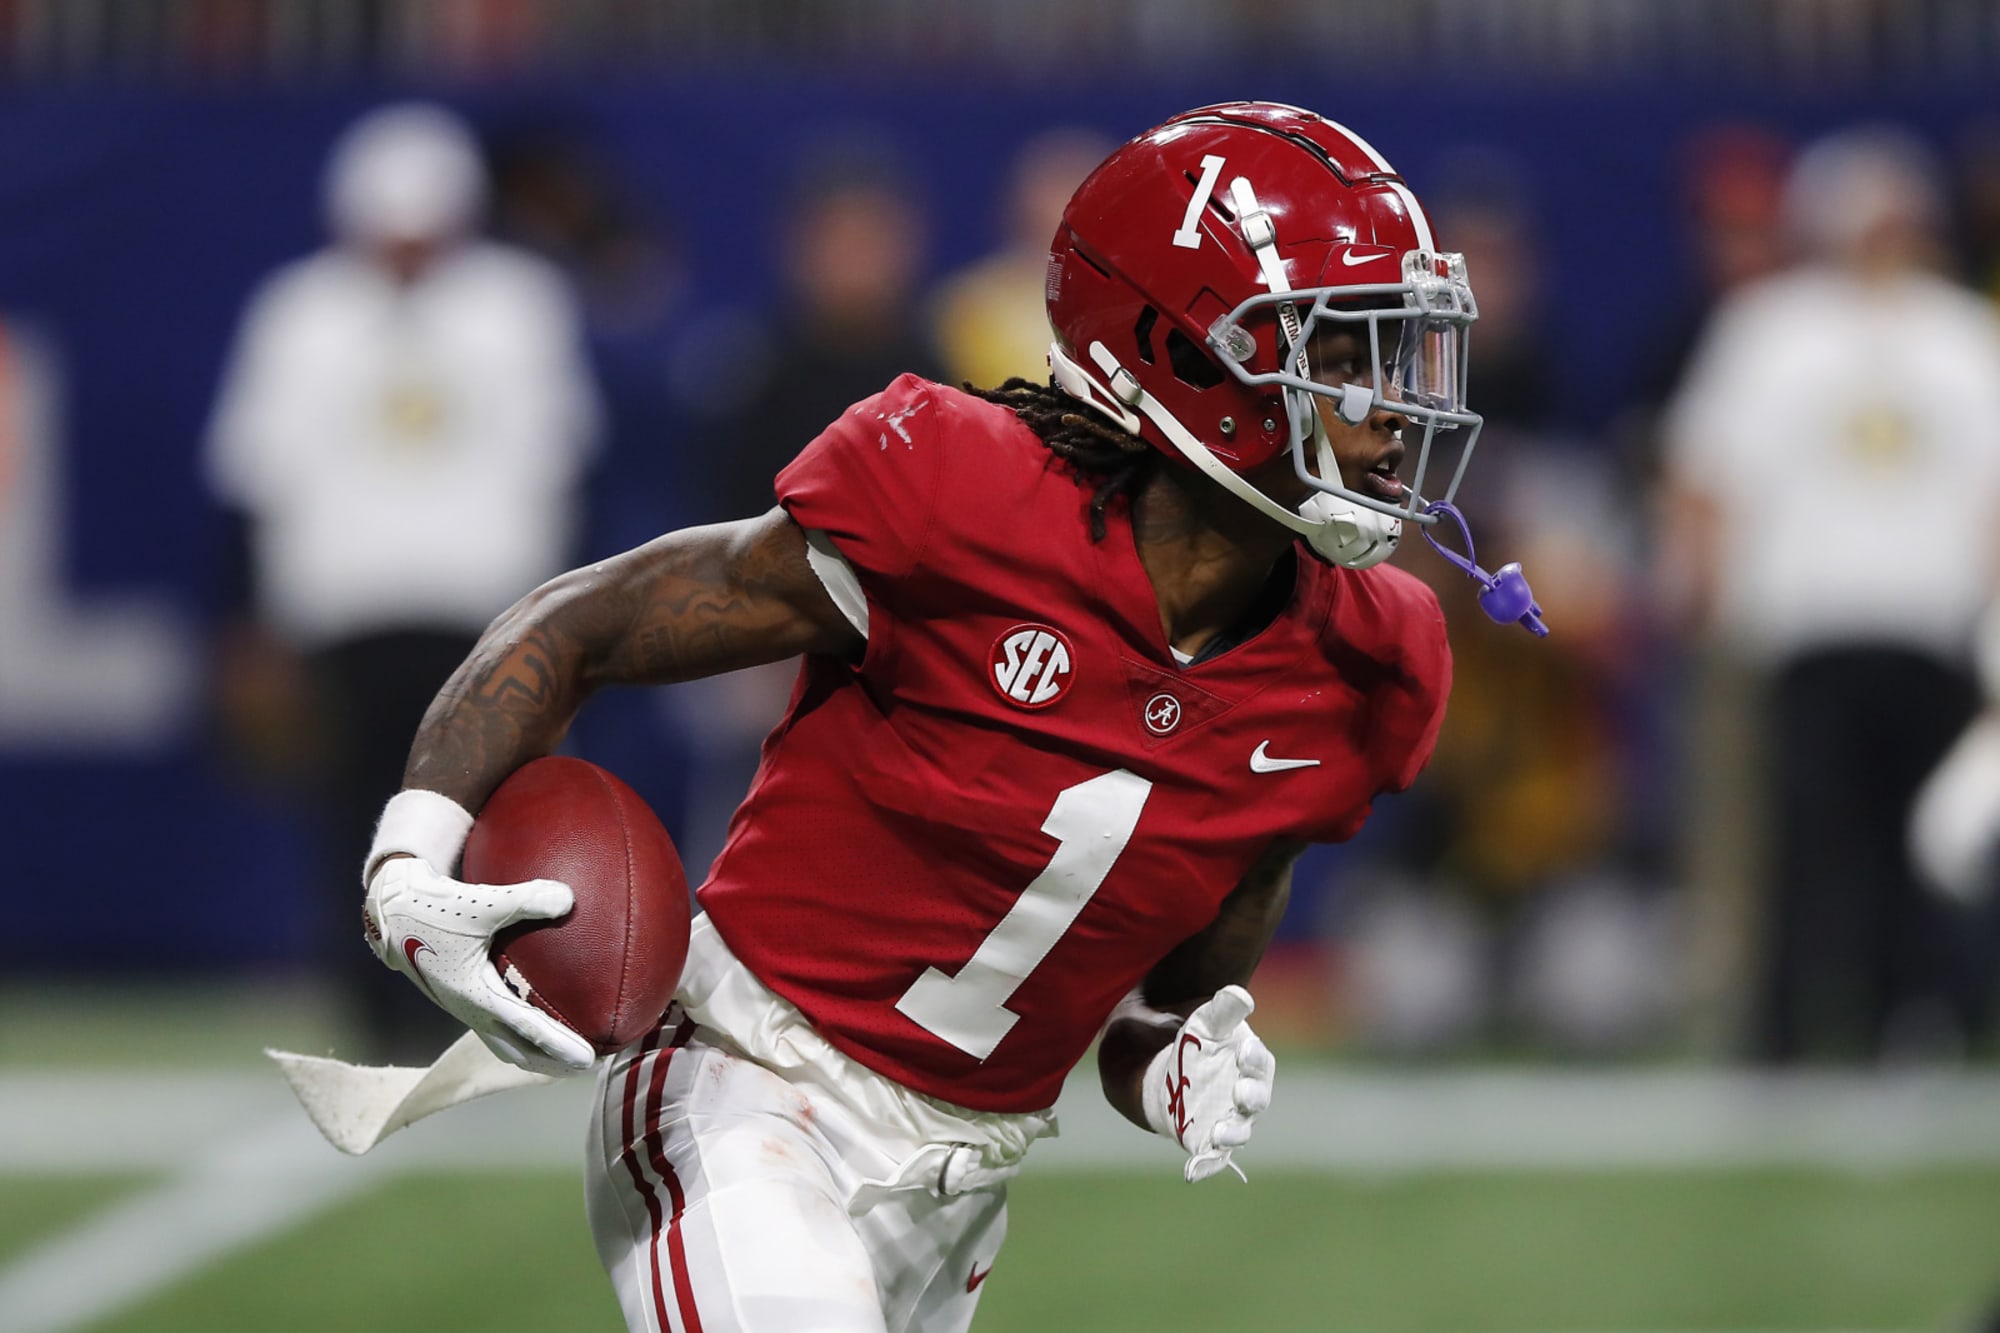 Alabama Football Jameson Williams drafted by Lions